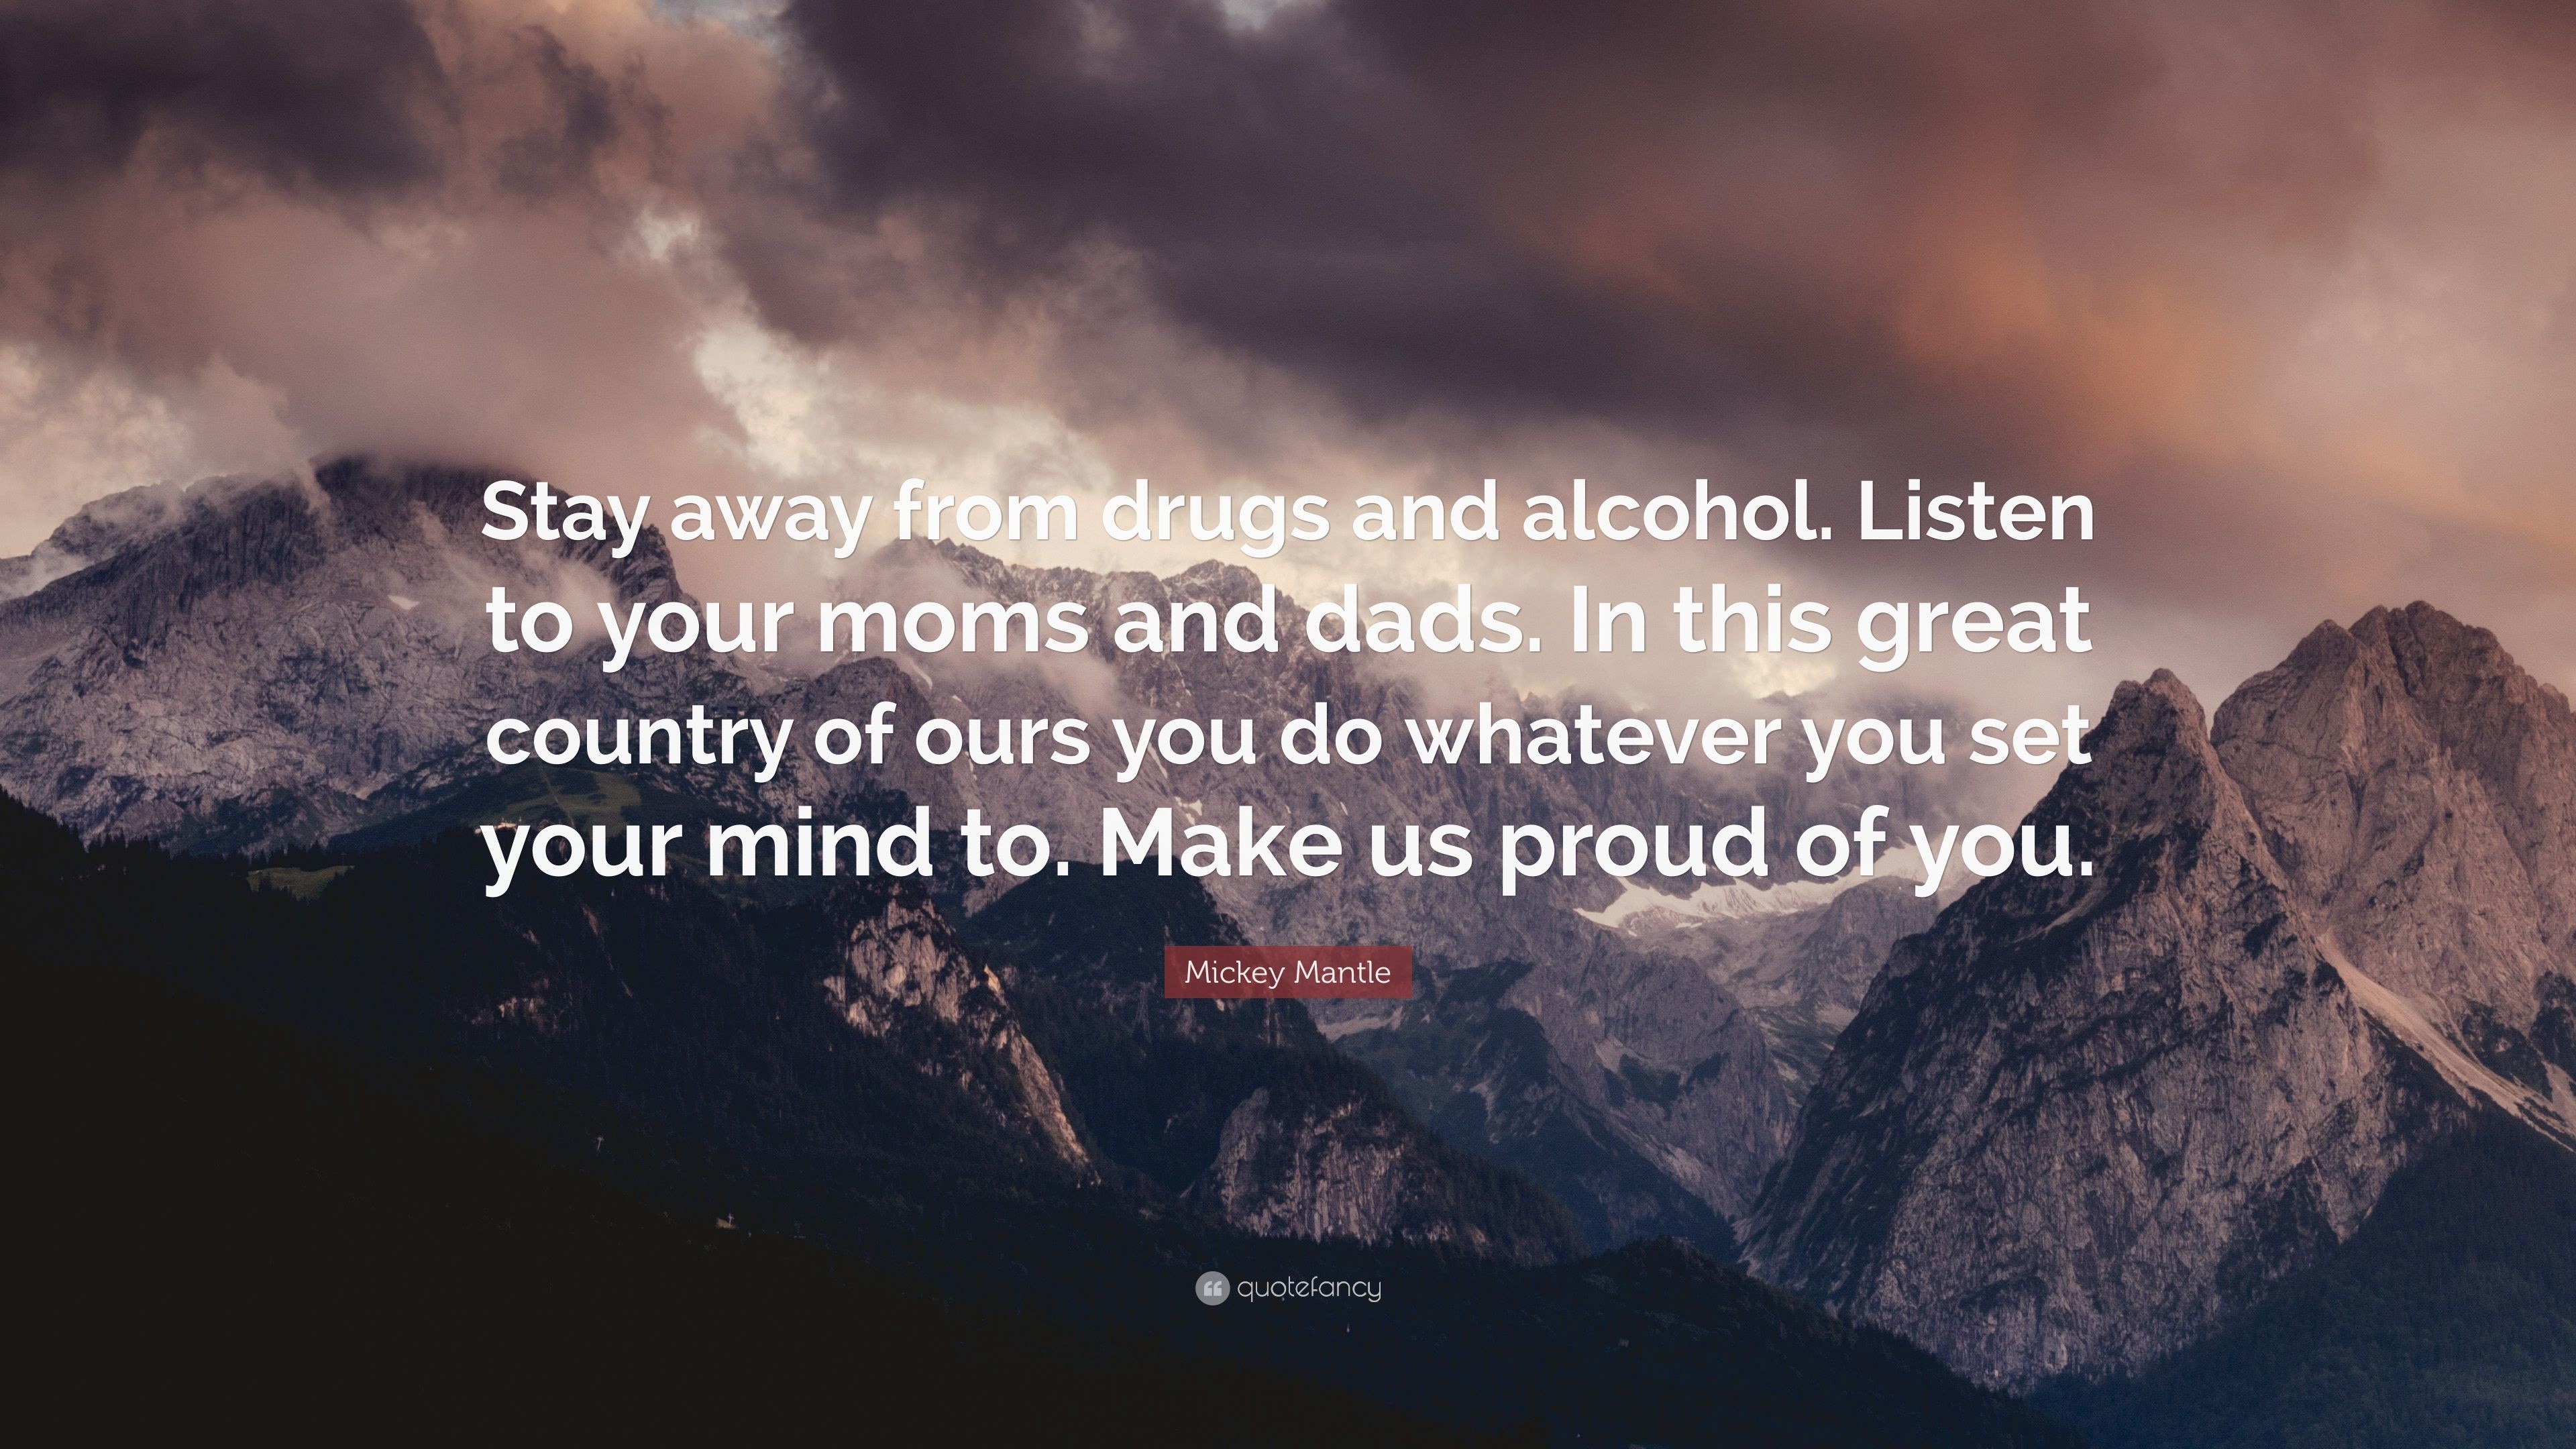 Mickey Mantle Quote Stay away from drugs and alcohol. Listen to your moms